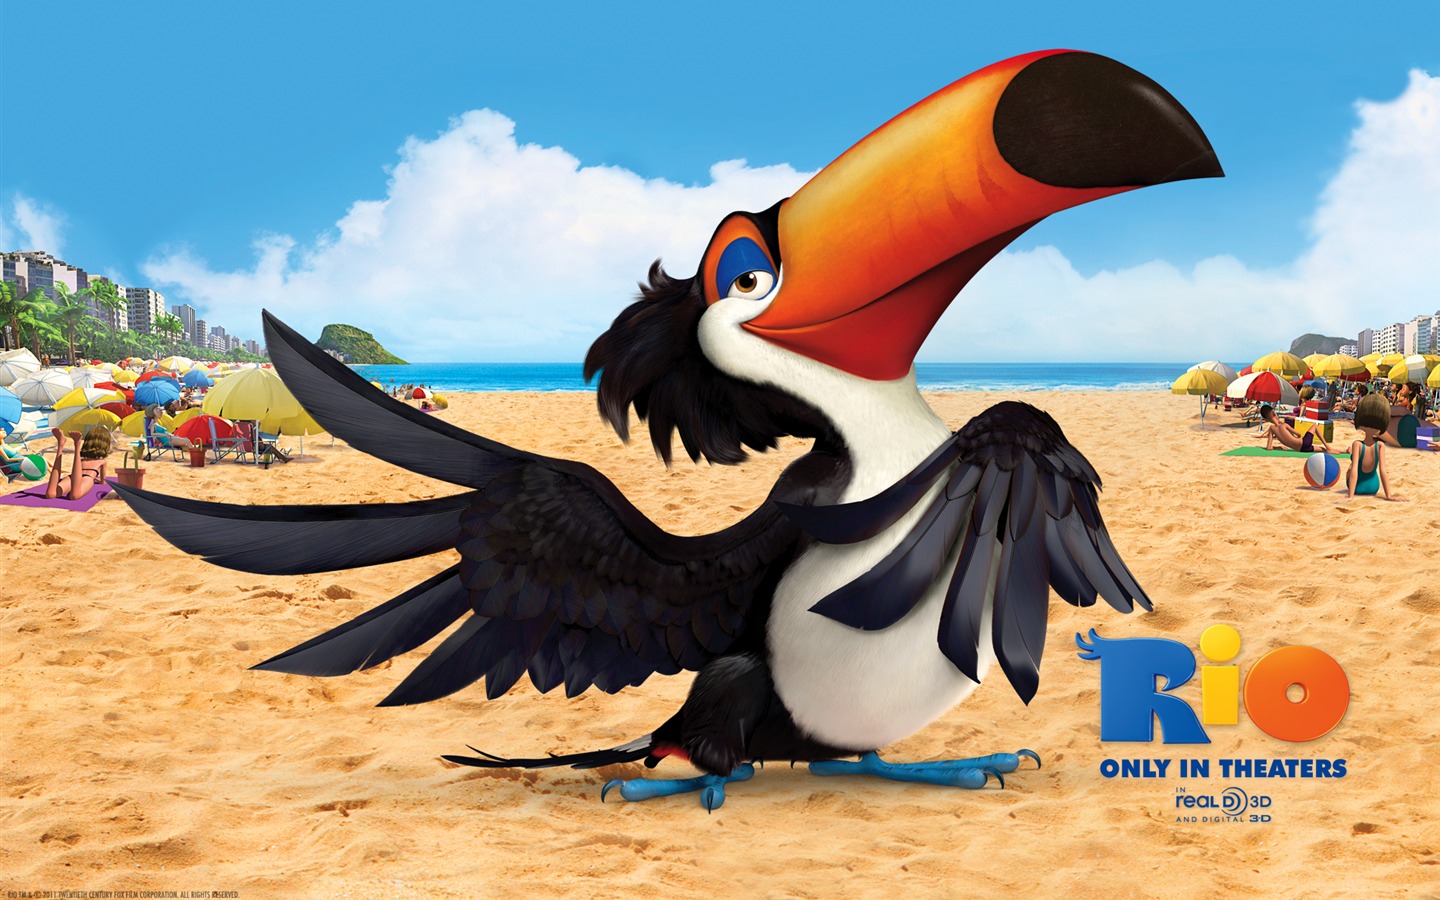 Rio 2011 wallpapers #16 - 1440x900